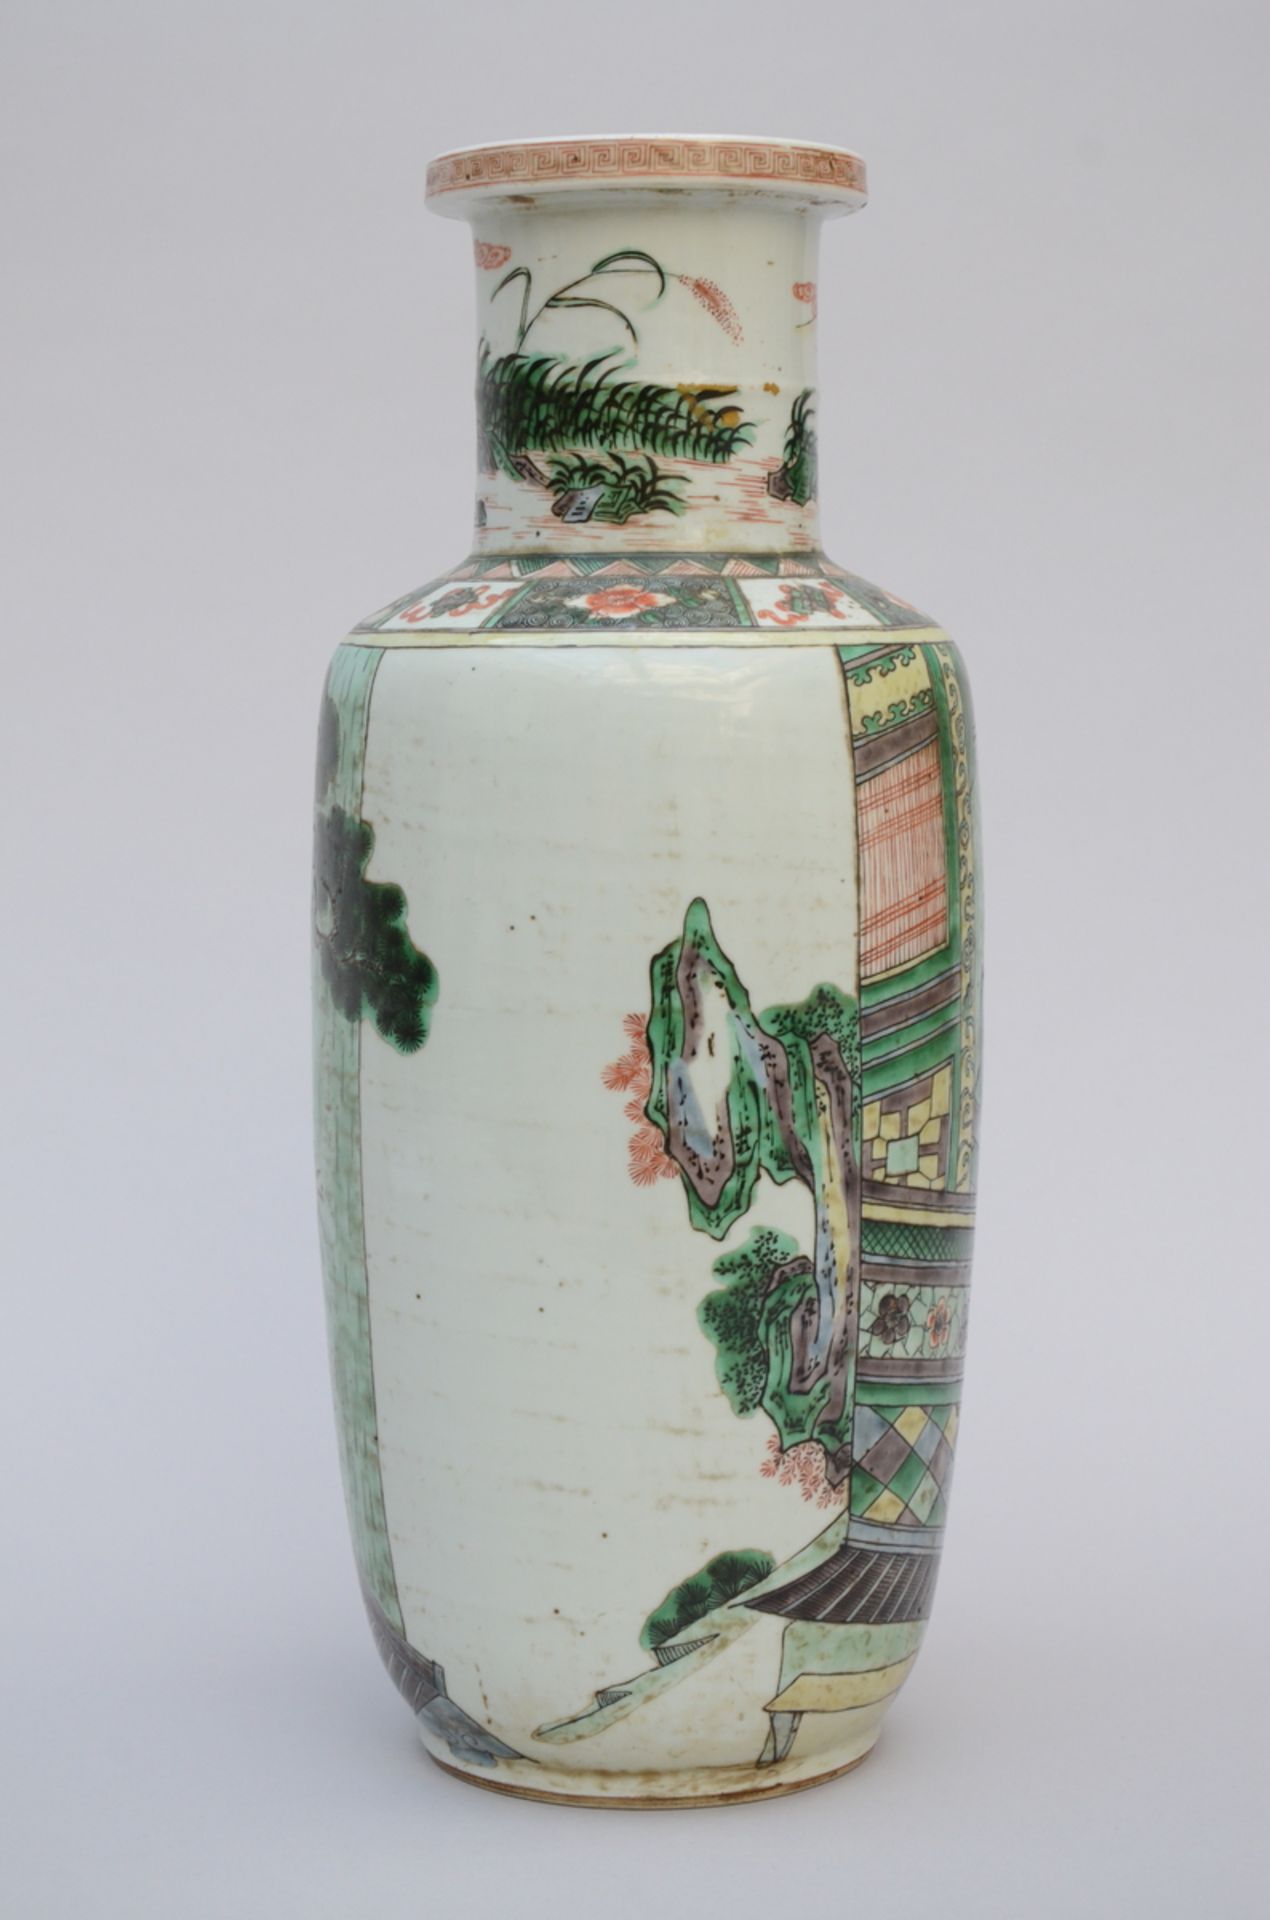 Rouleau vase in Chinese famille verte porcelain 'court scene' (47cm) - Image 2 of 4